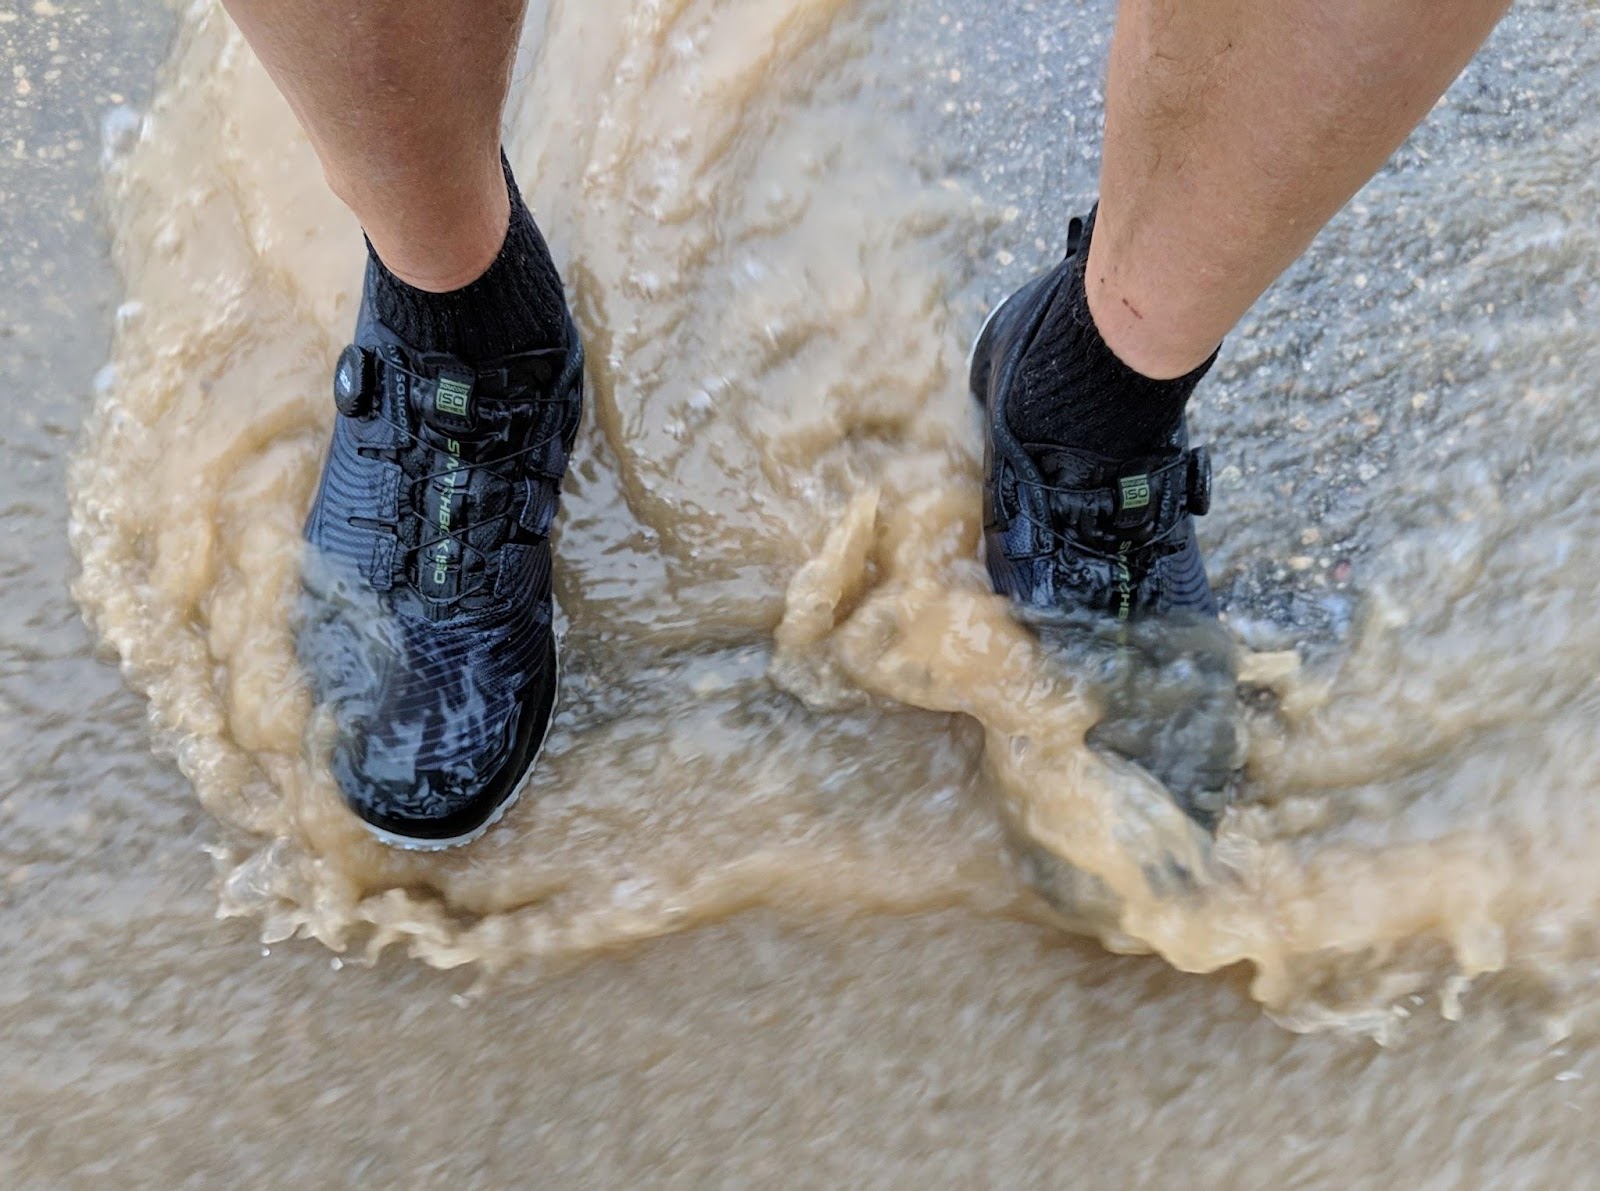 saucony switchback review